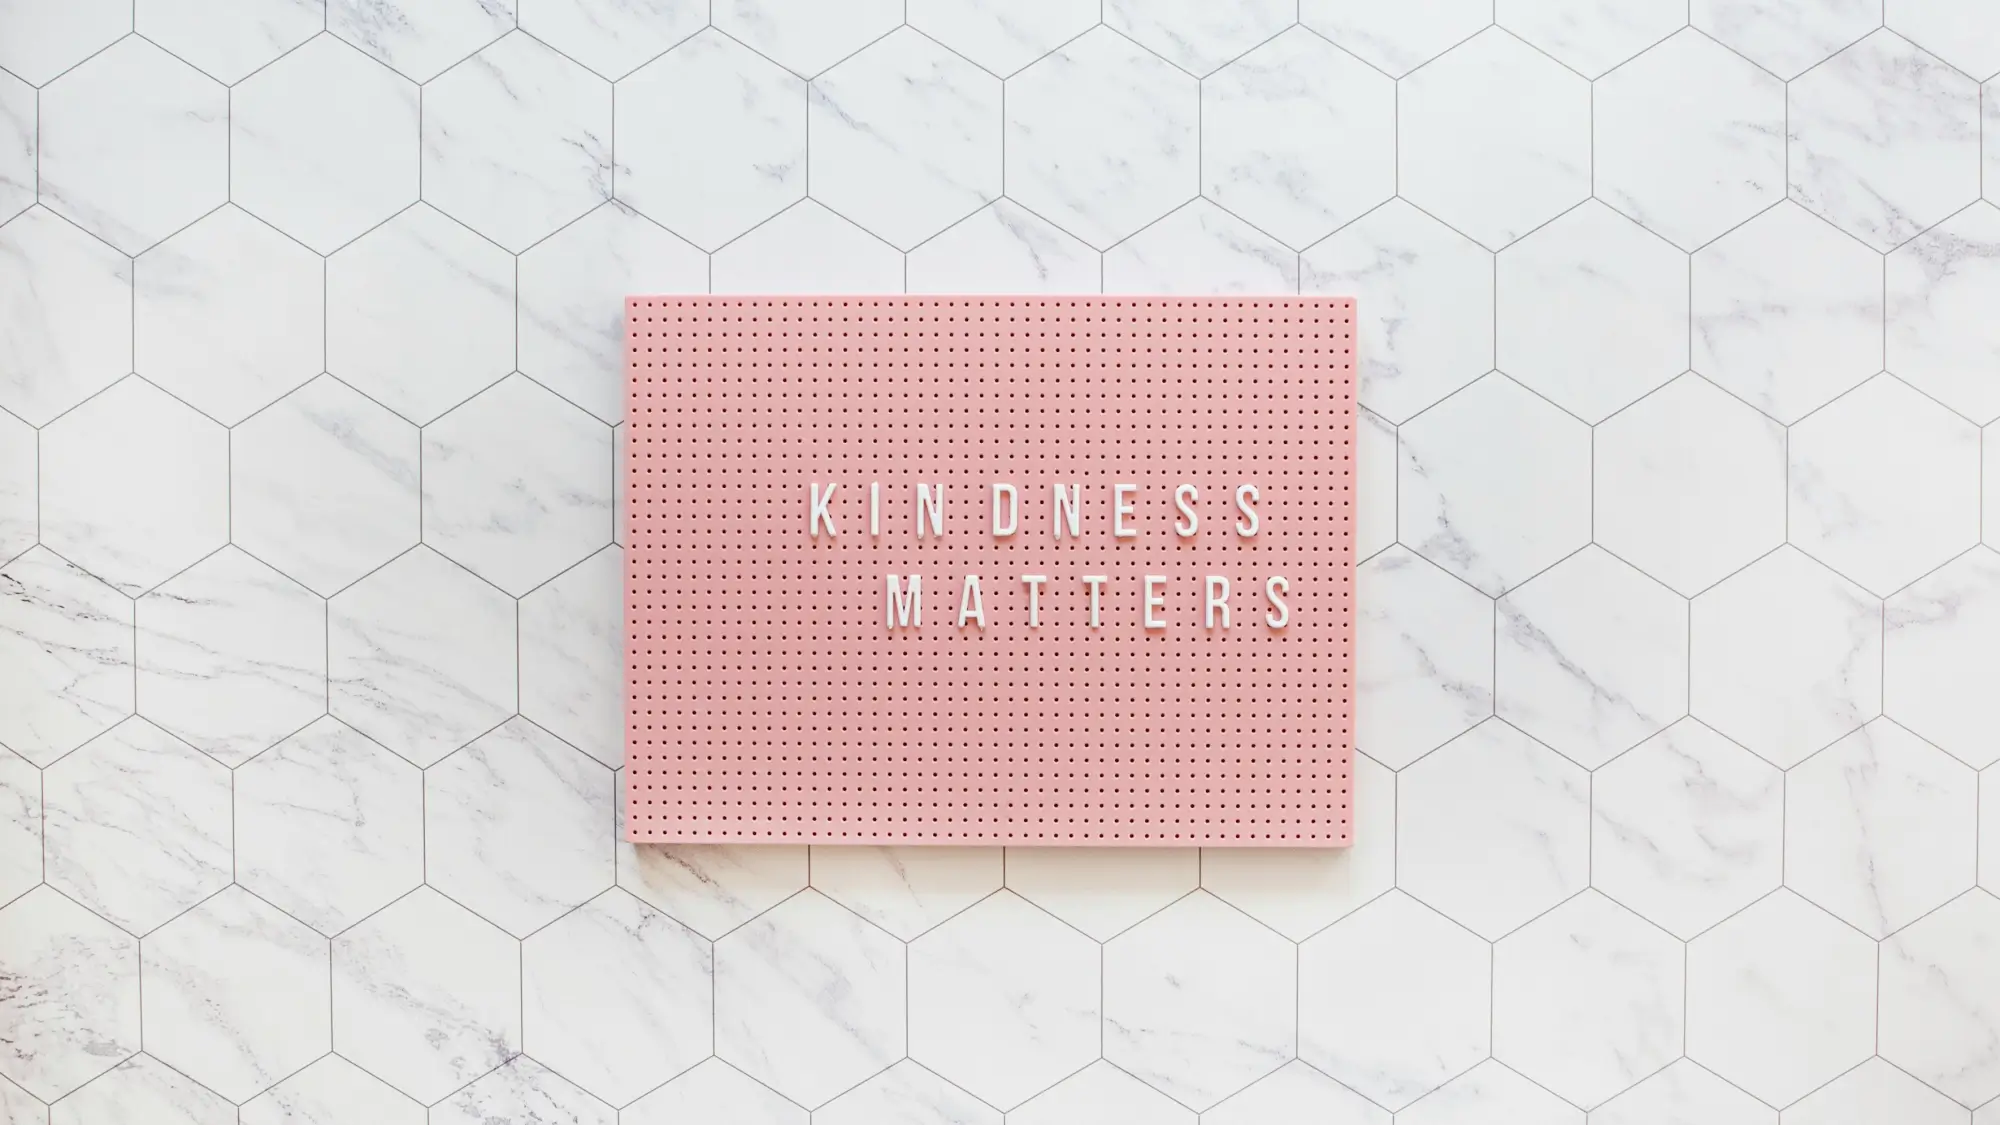 Kindness matters, be kind always. Pink pegboard on while tiles